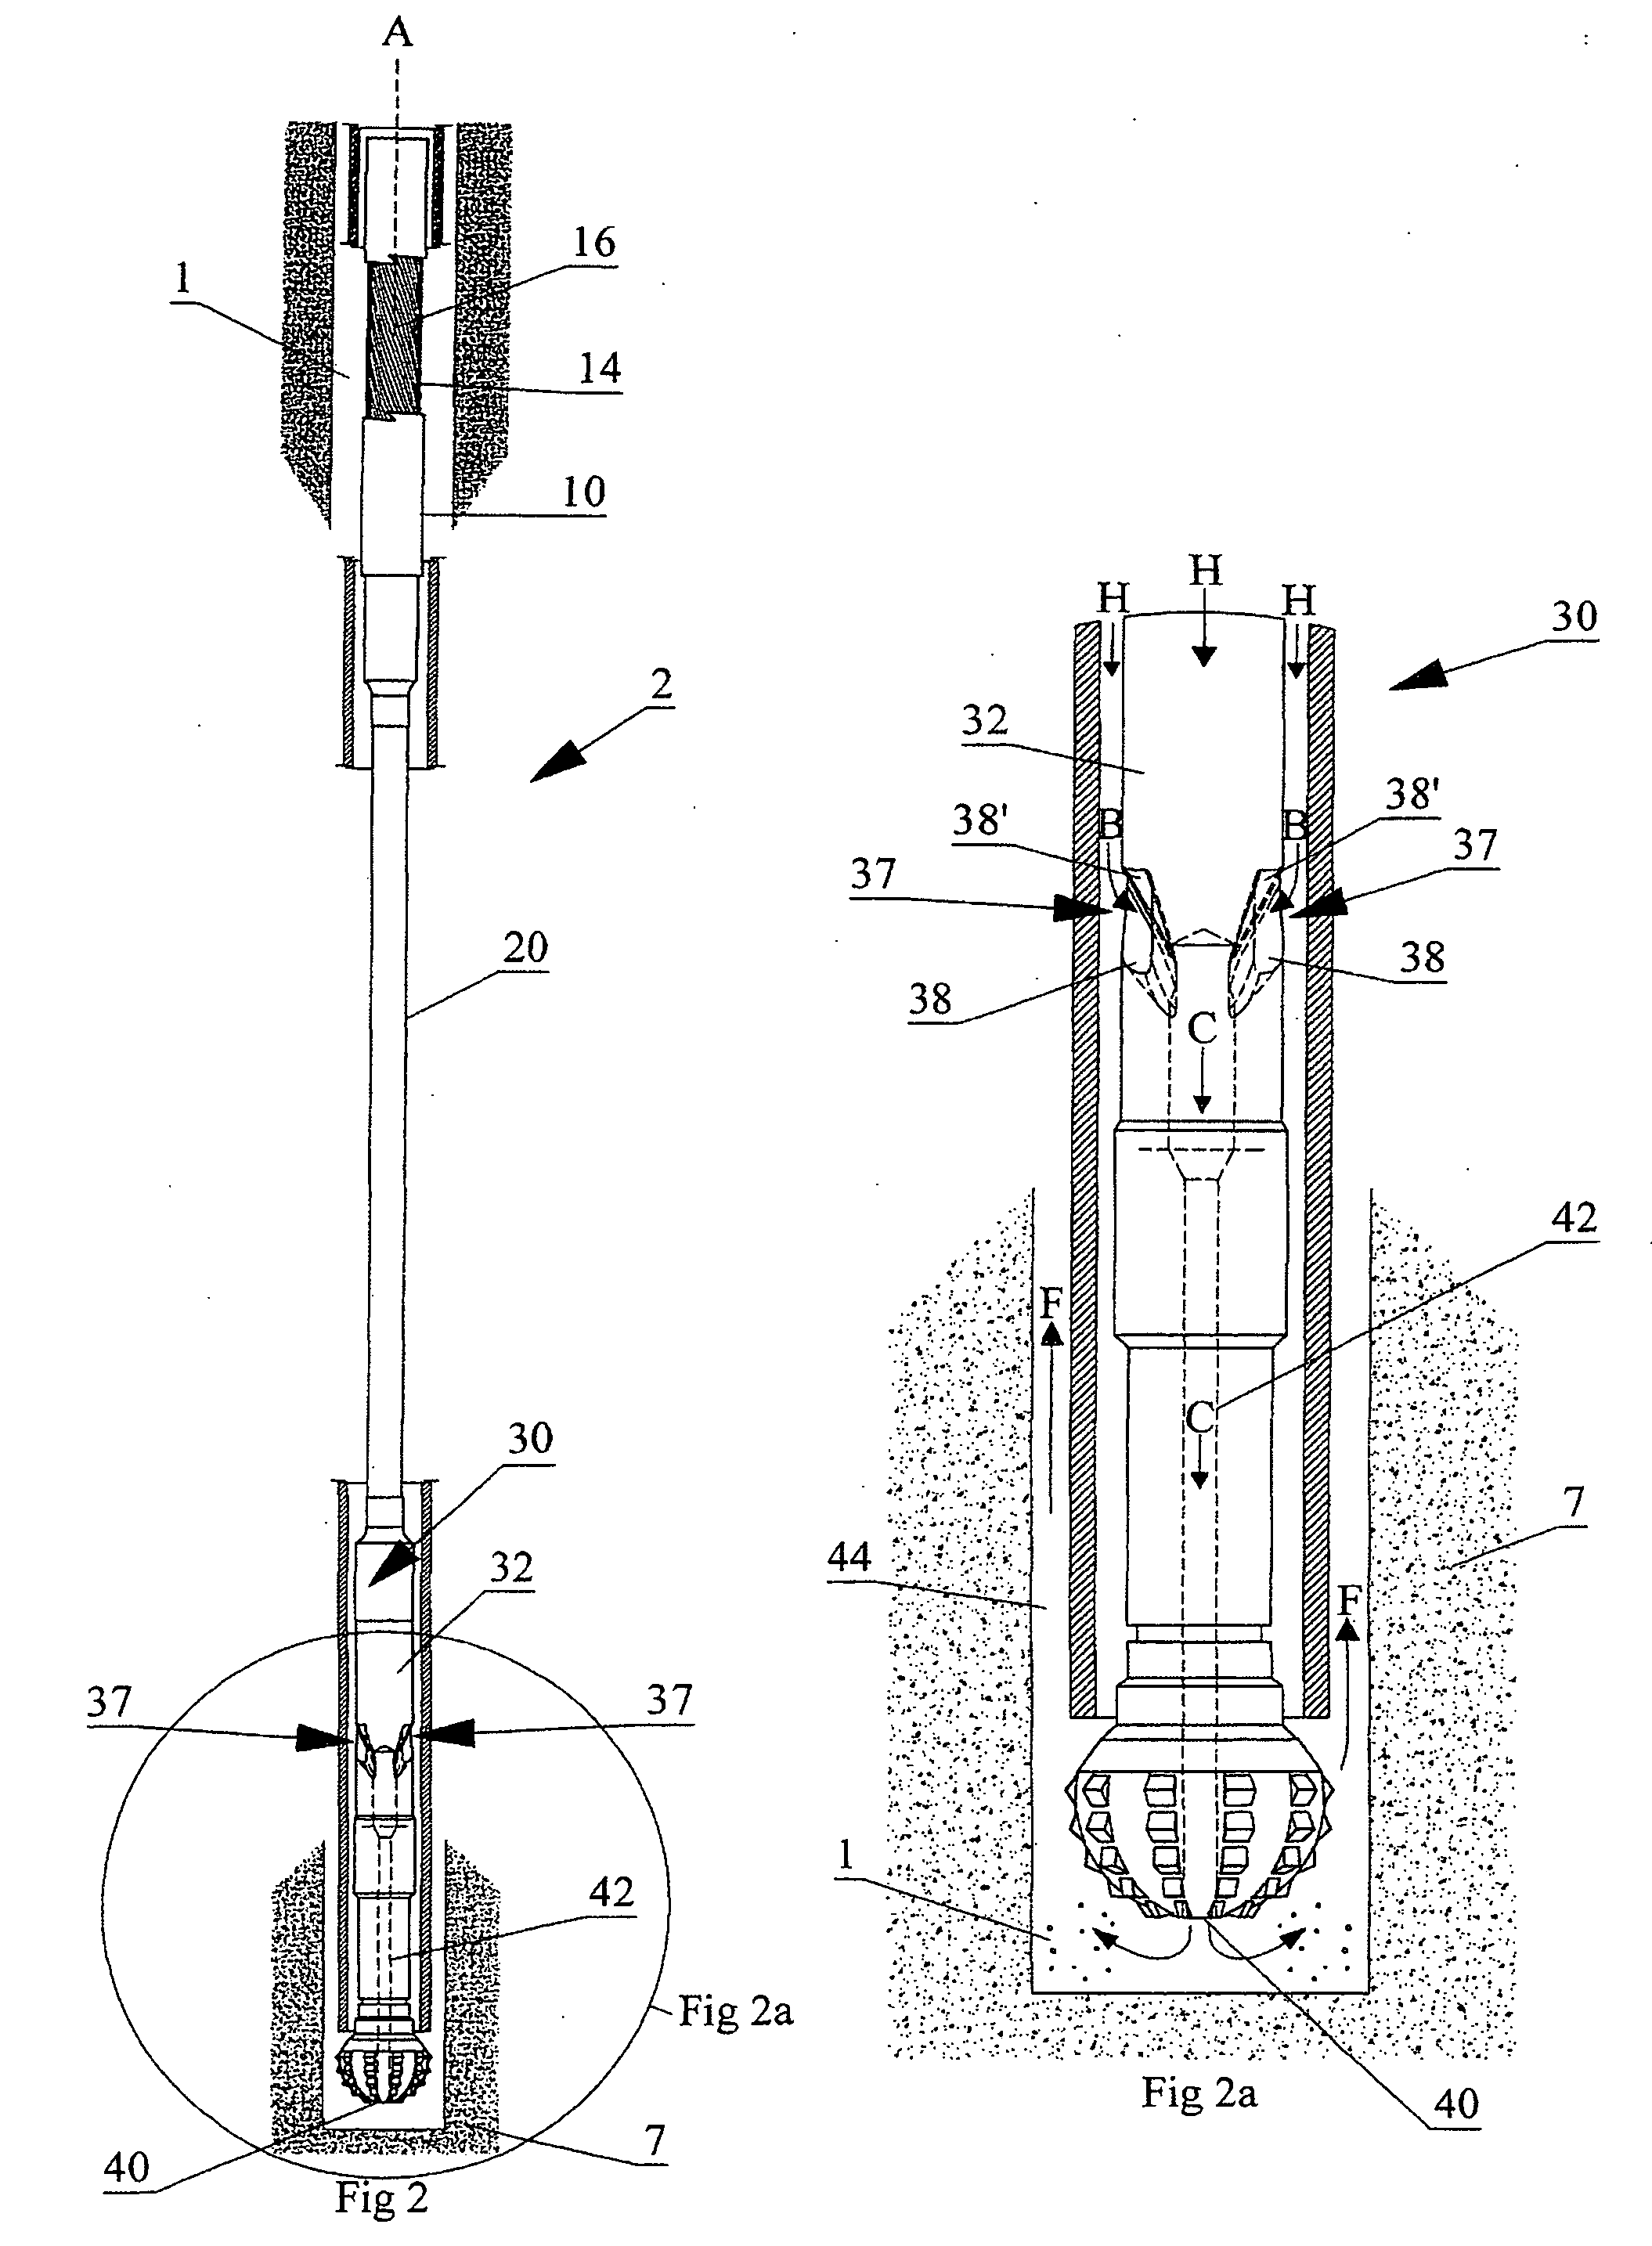 Fluid driven drilling motor and system